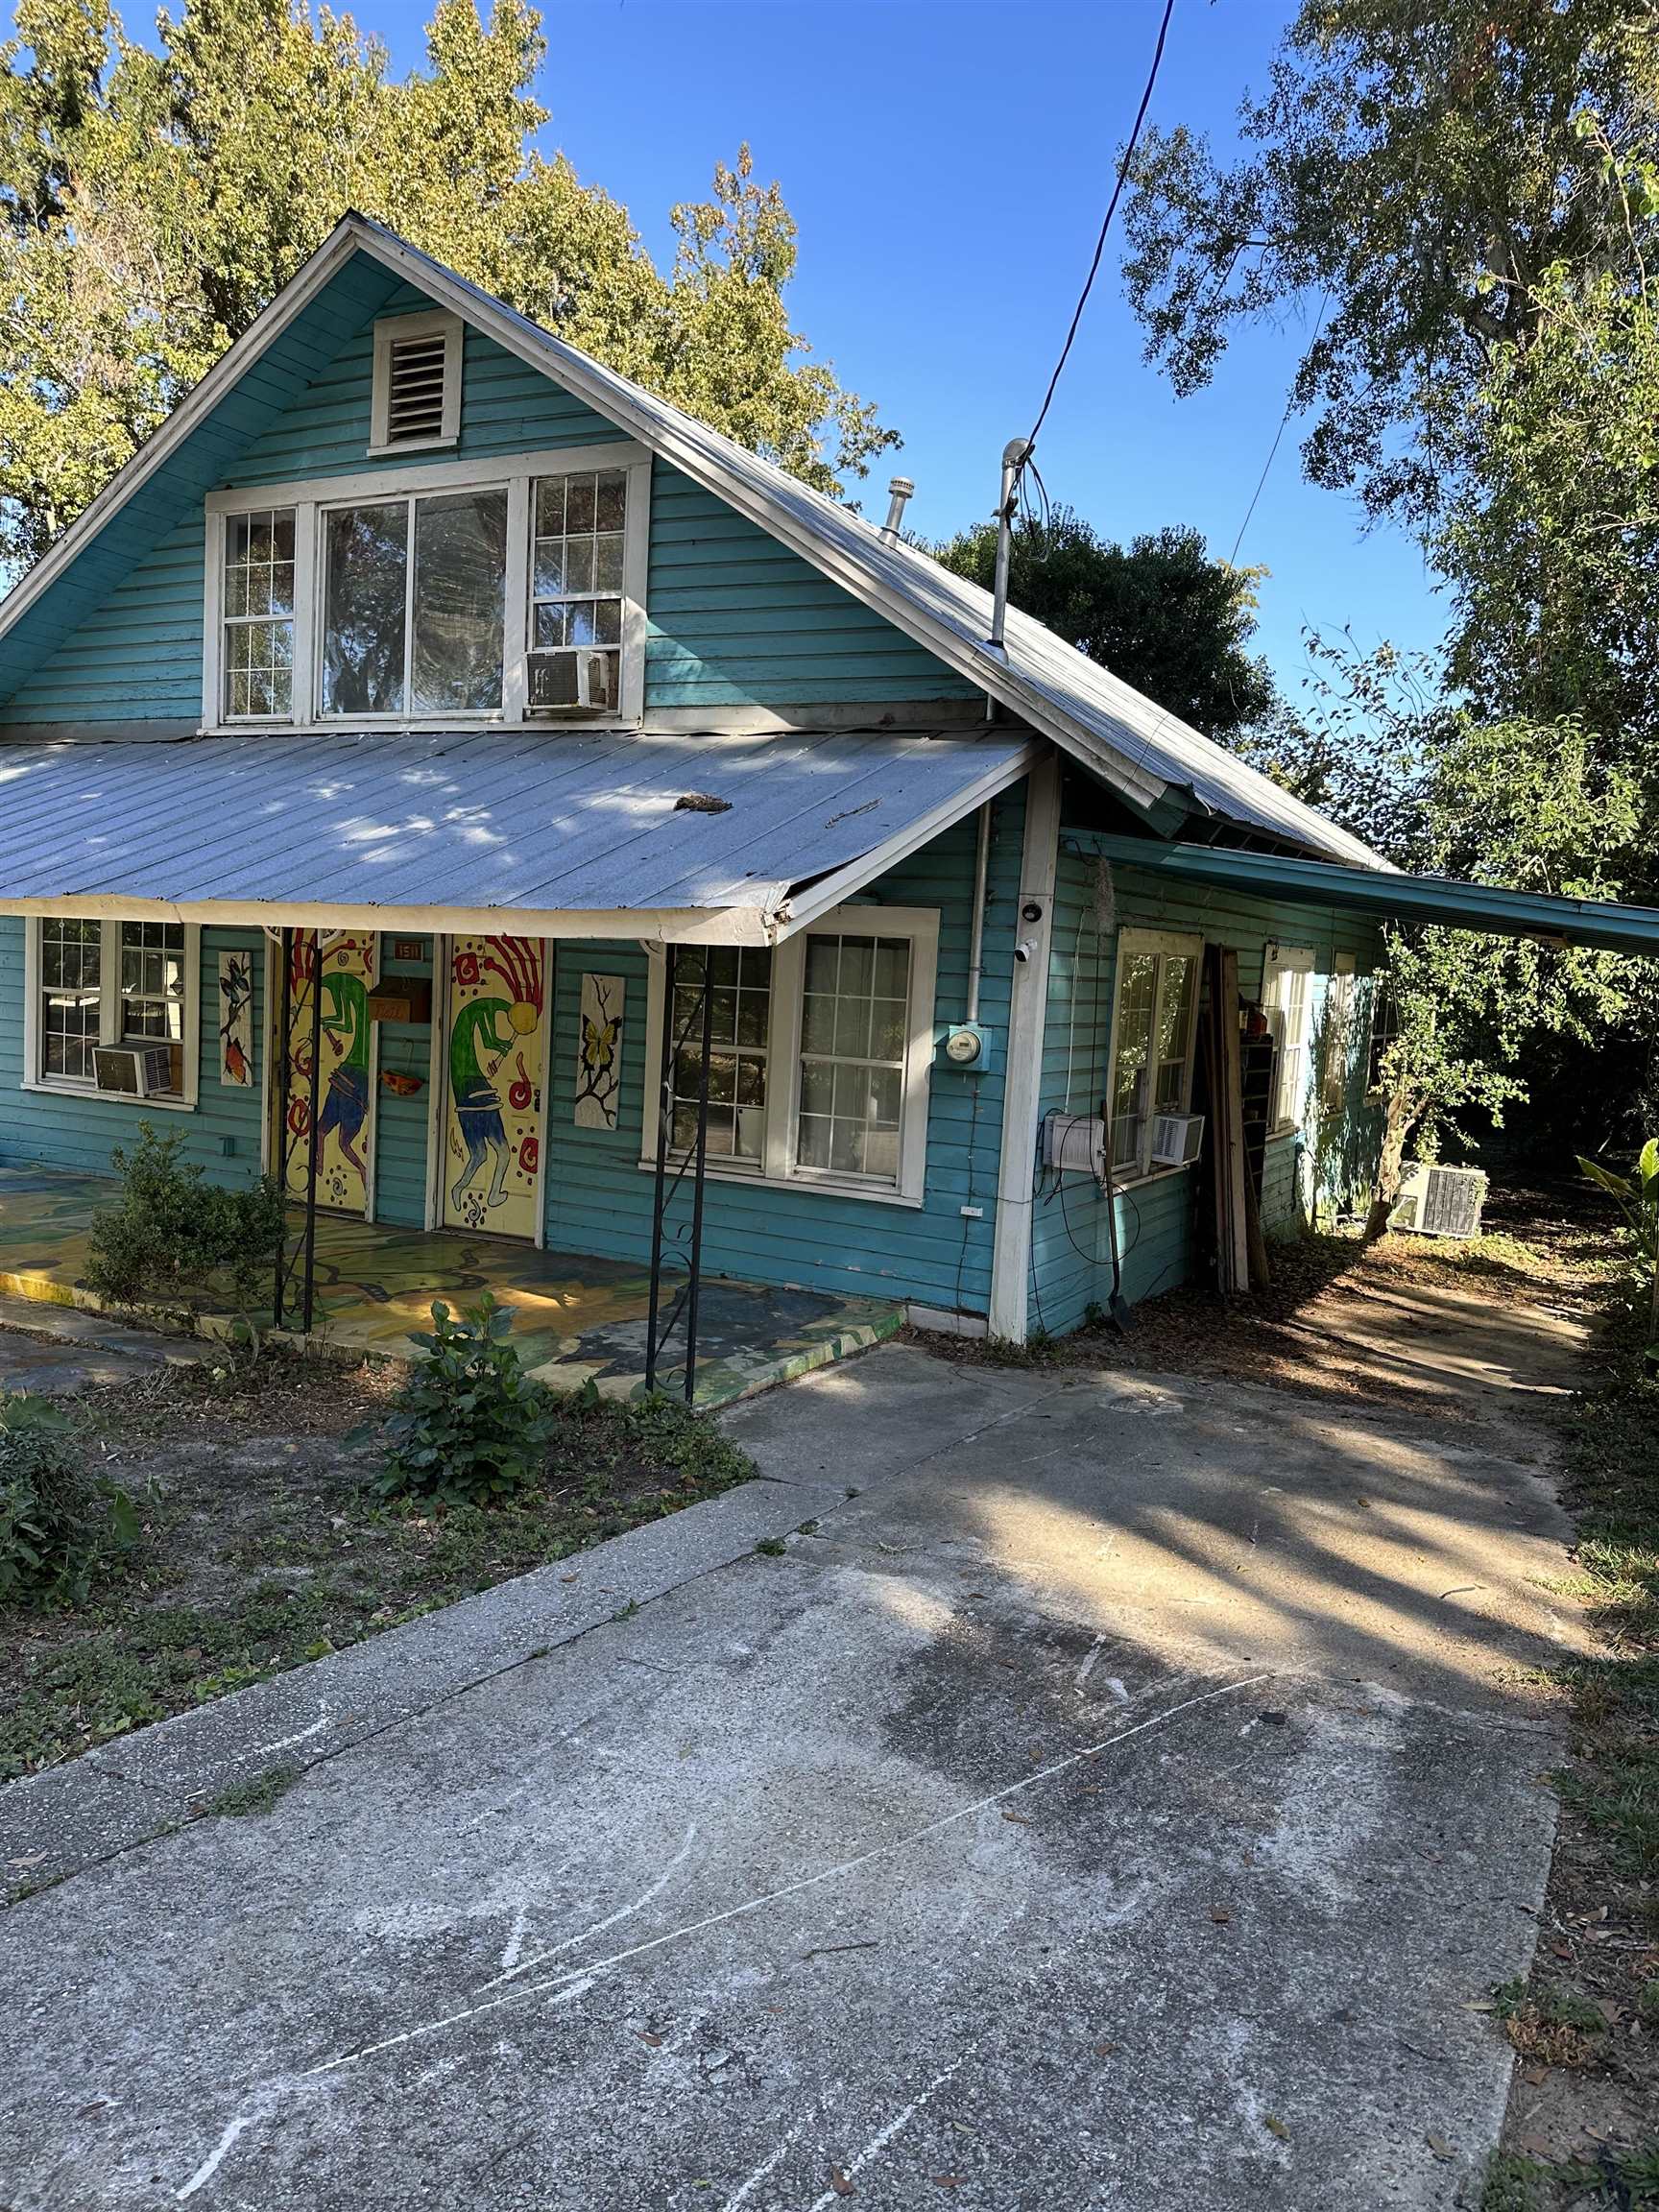 Multiple offers. Highest and best by Sat. 11/18 at 10:00am. Seller will make decision by Sunday at 5 on 11/19.Good location. Close to Universities. 1 block to Famu. House needs repairs and updating. Great for investors. Cash only. Selling “as is” seller will not do repairs. Buyer does own measurements as listed ones not guaranteed. Appointment only. Tenant leaves  end of this November.